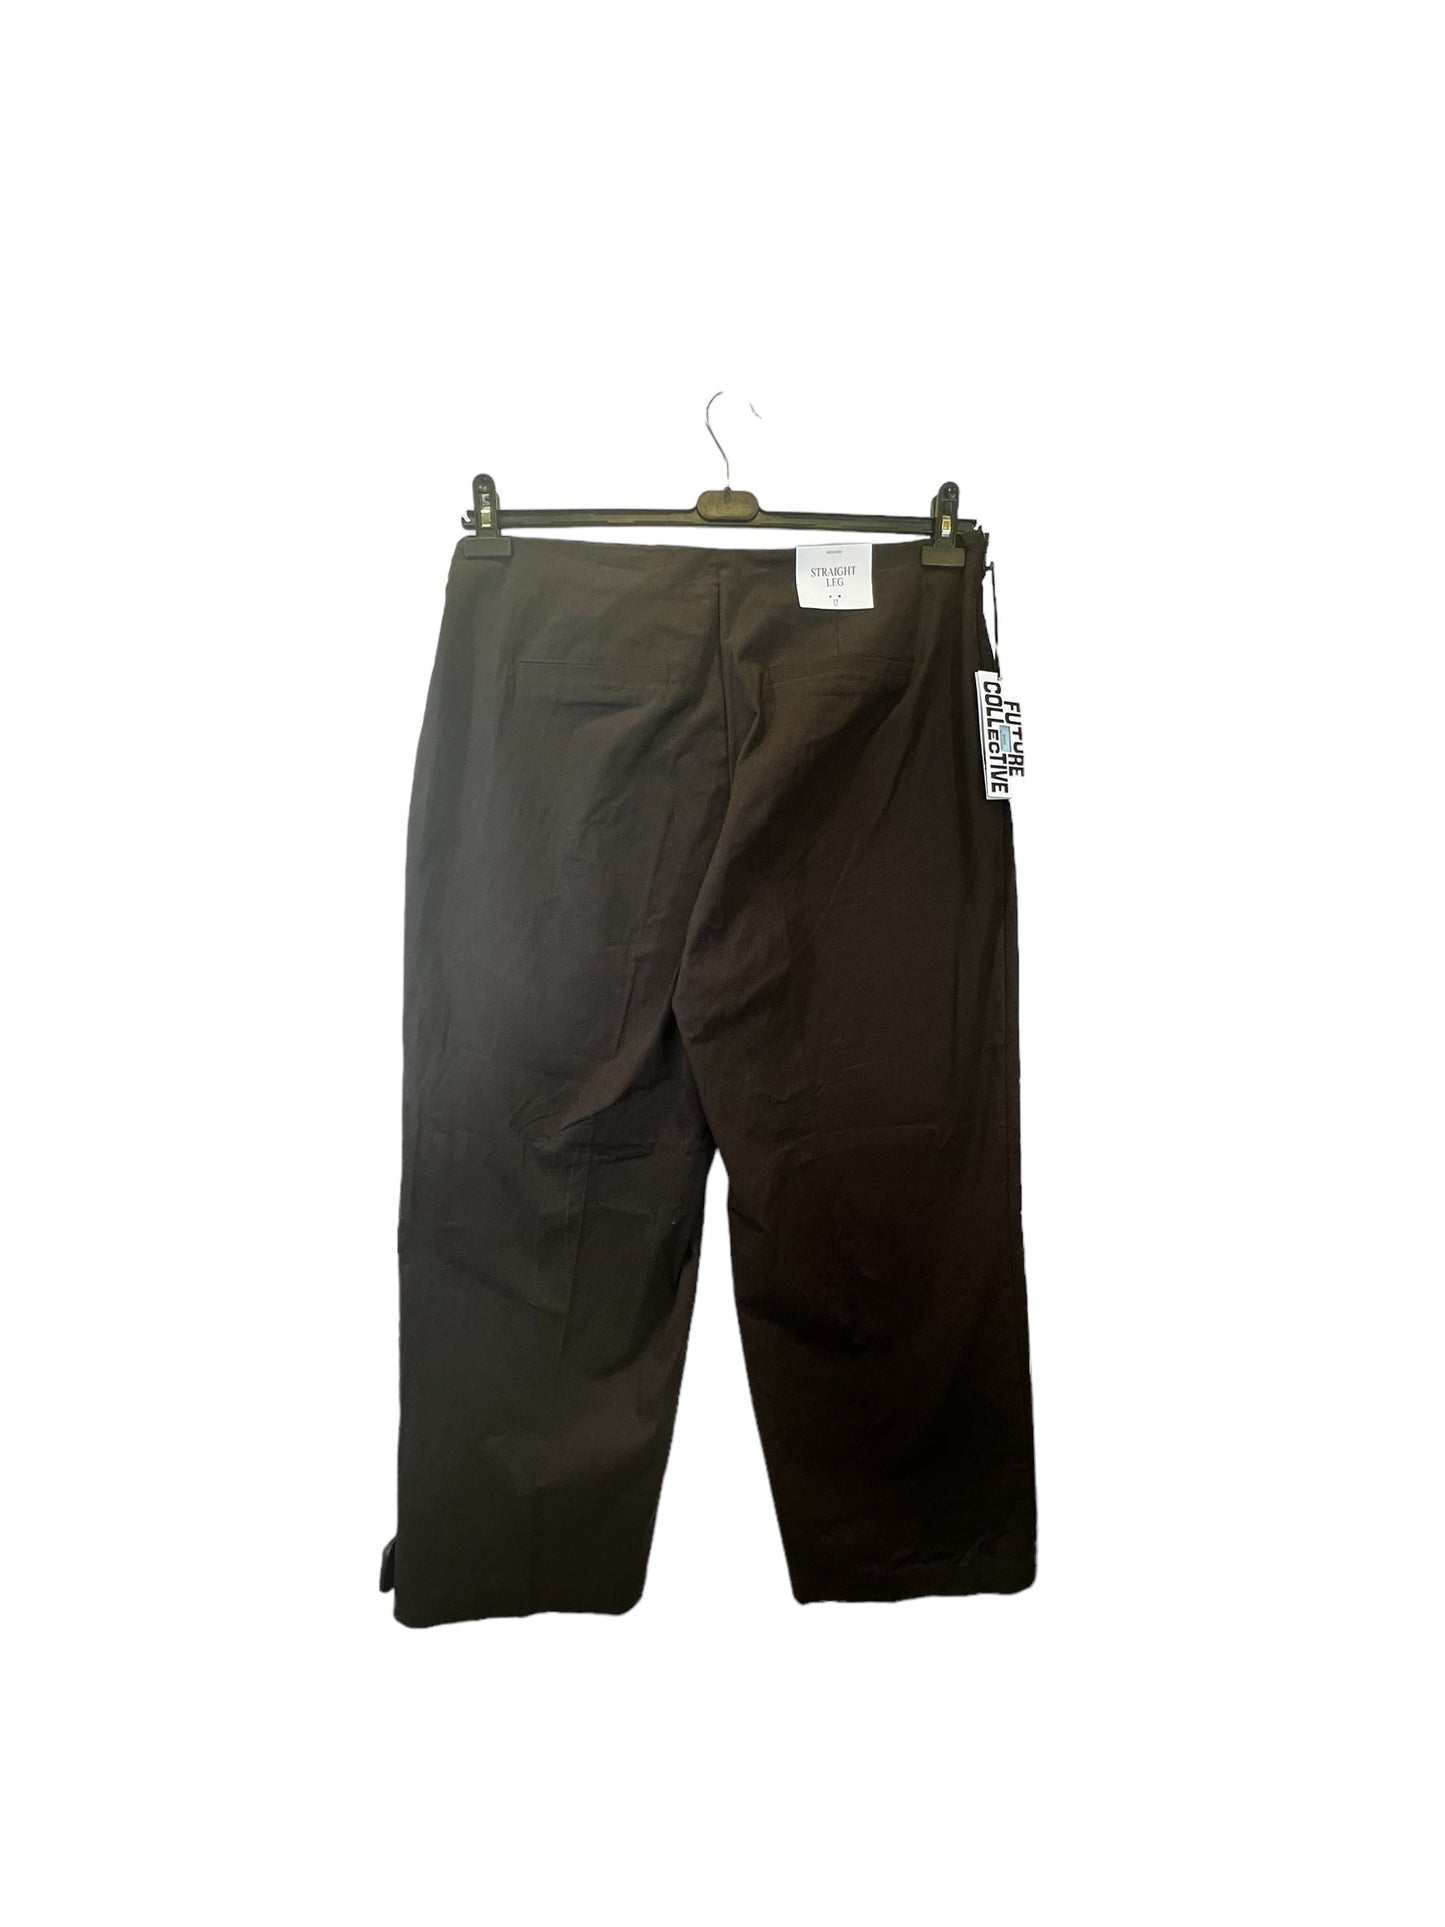 Pants Other By Clothes Mentor  Size: 2x